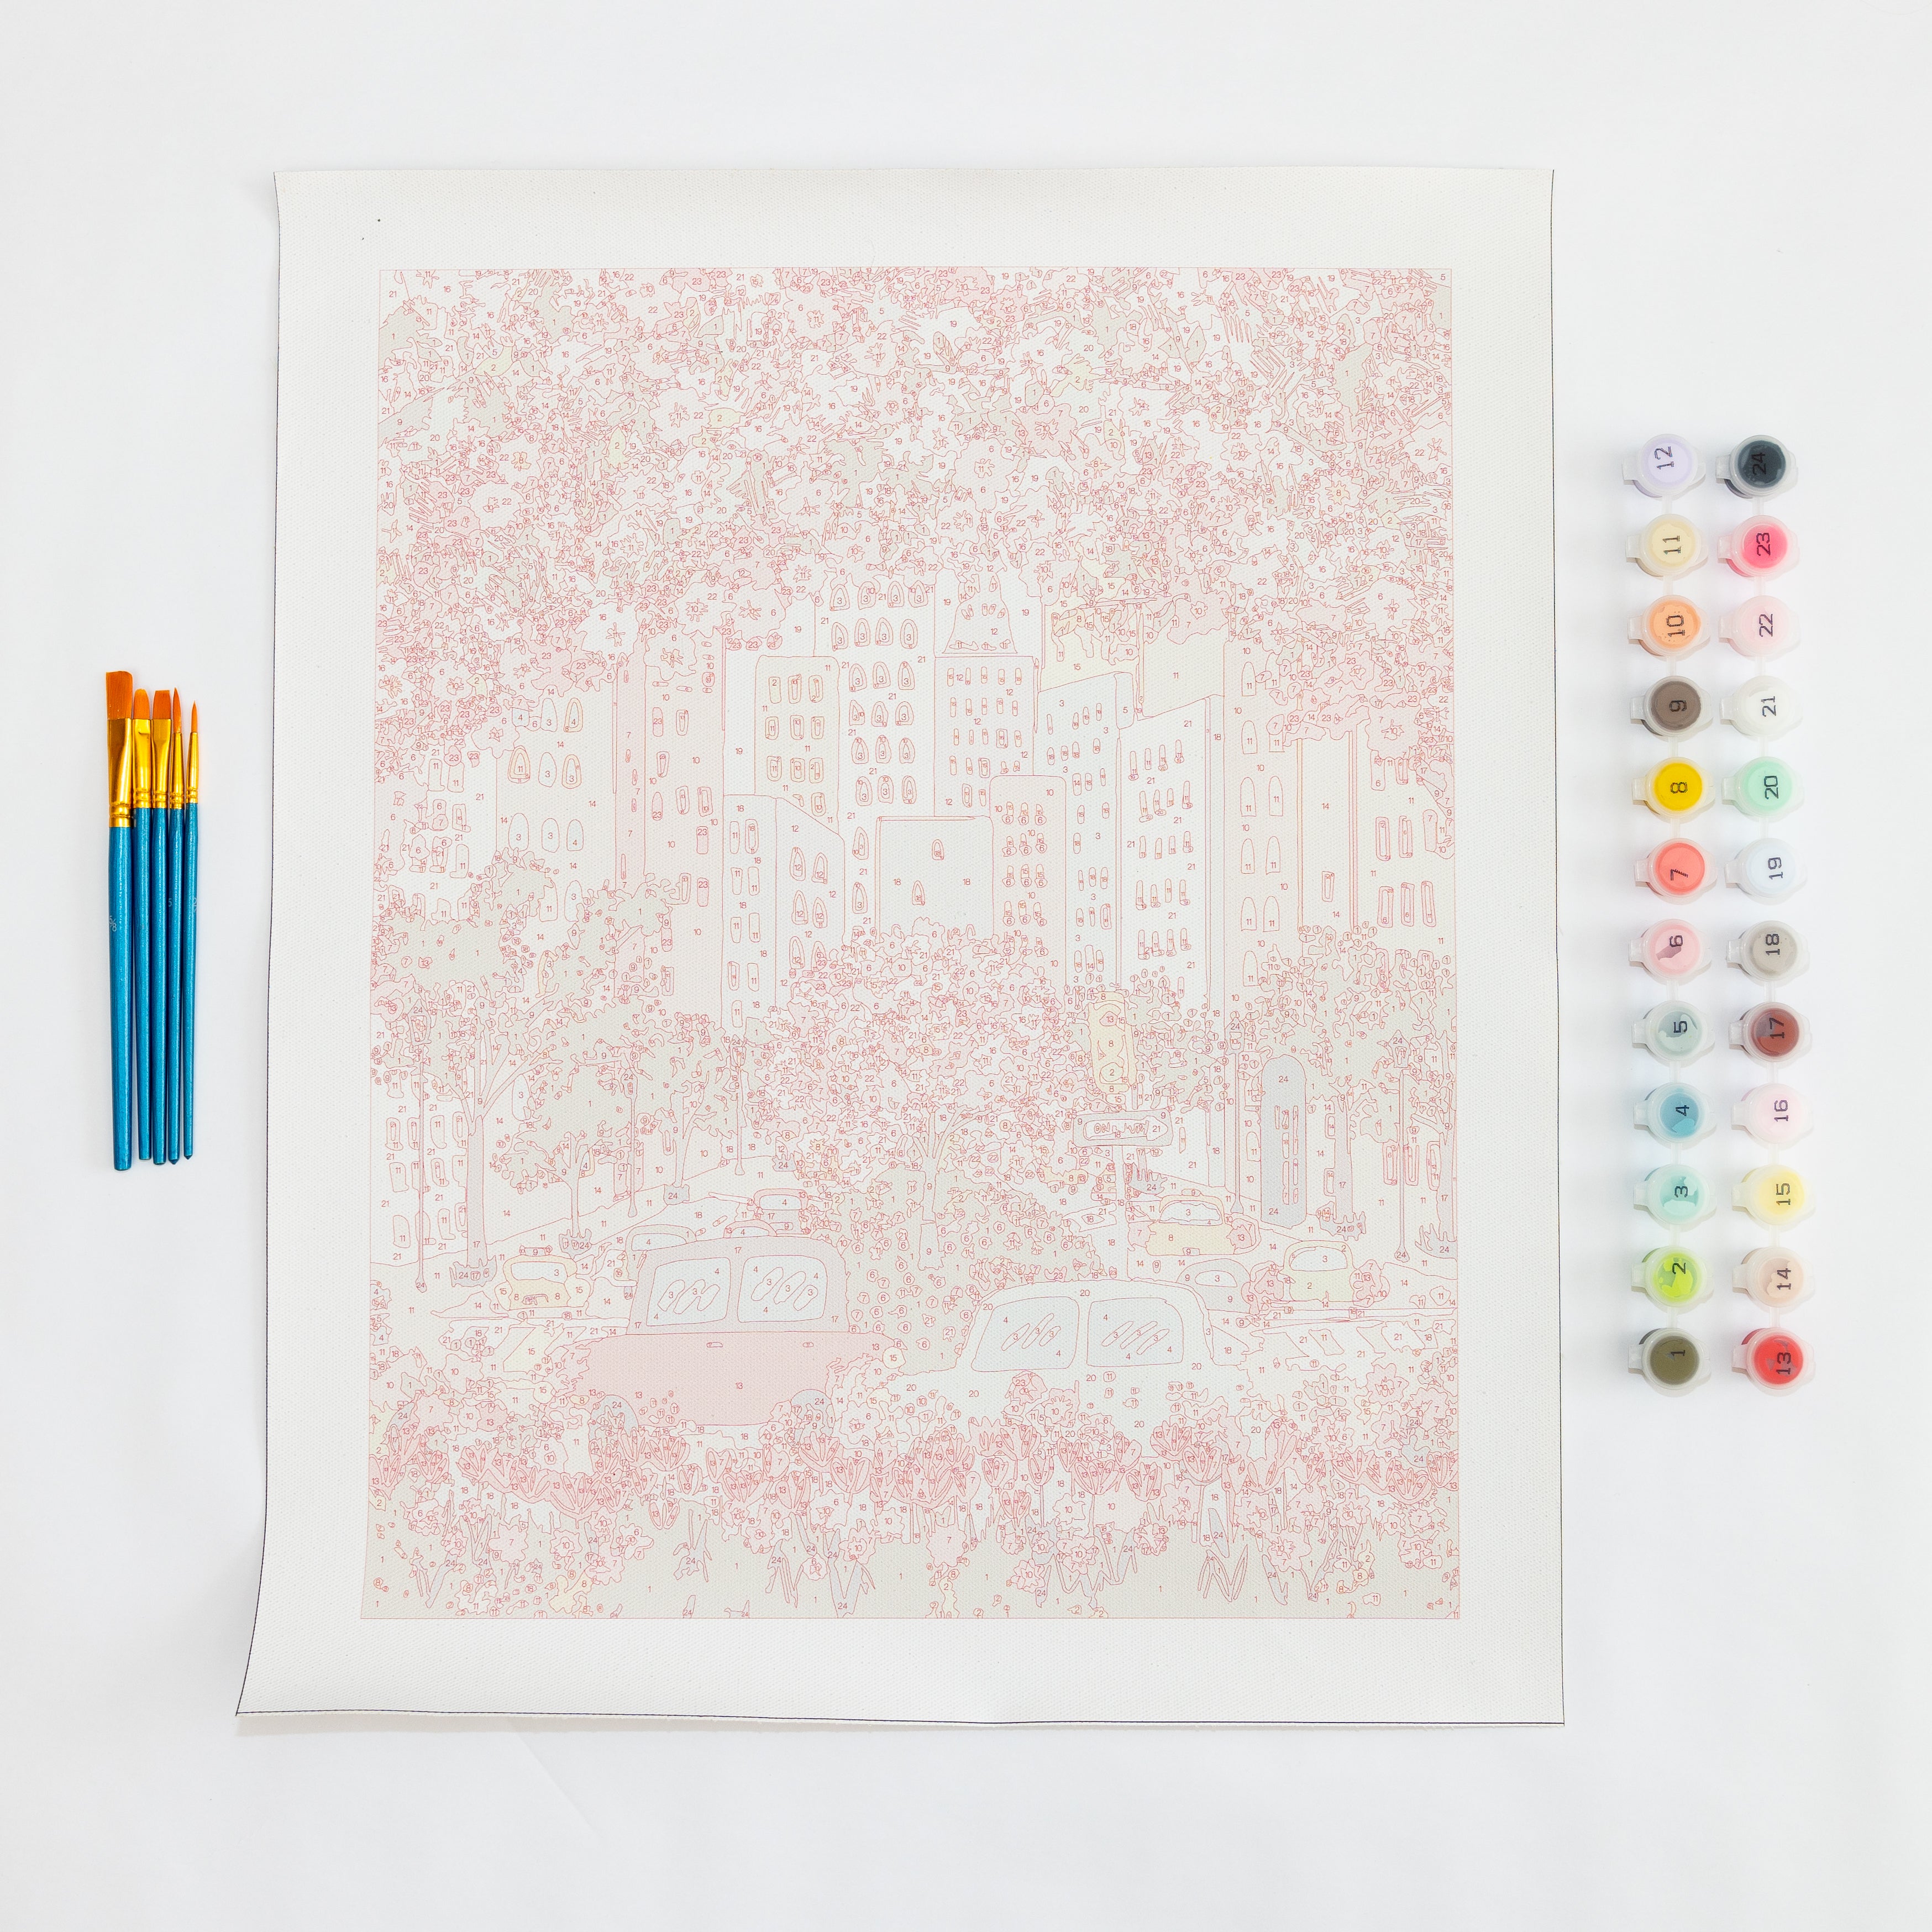 Peach City by Joy Laforme Paint by Numbers Deluxe